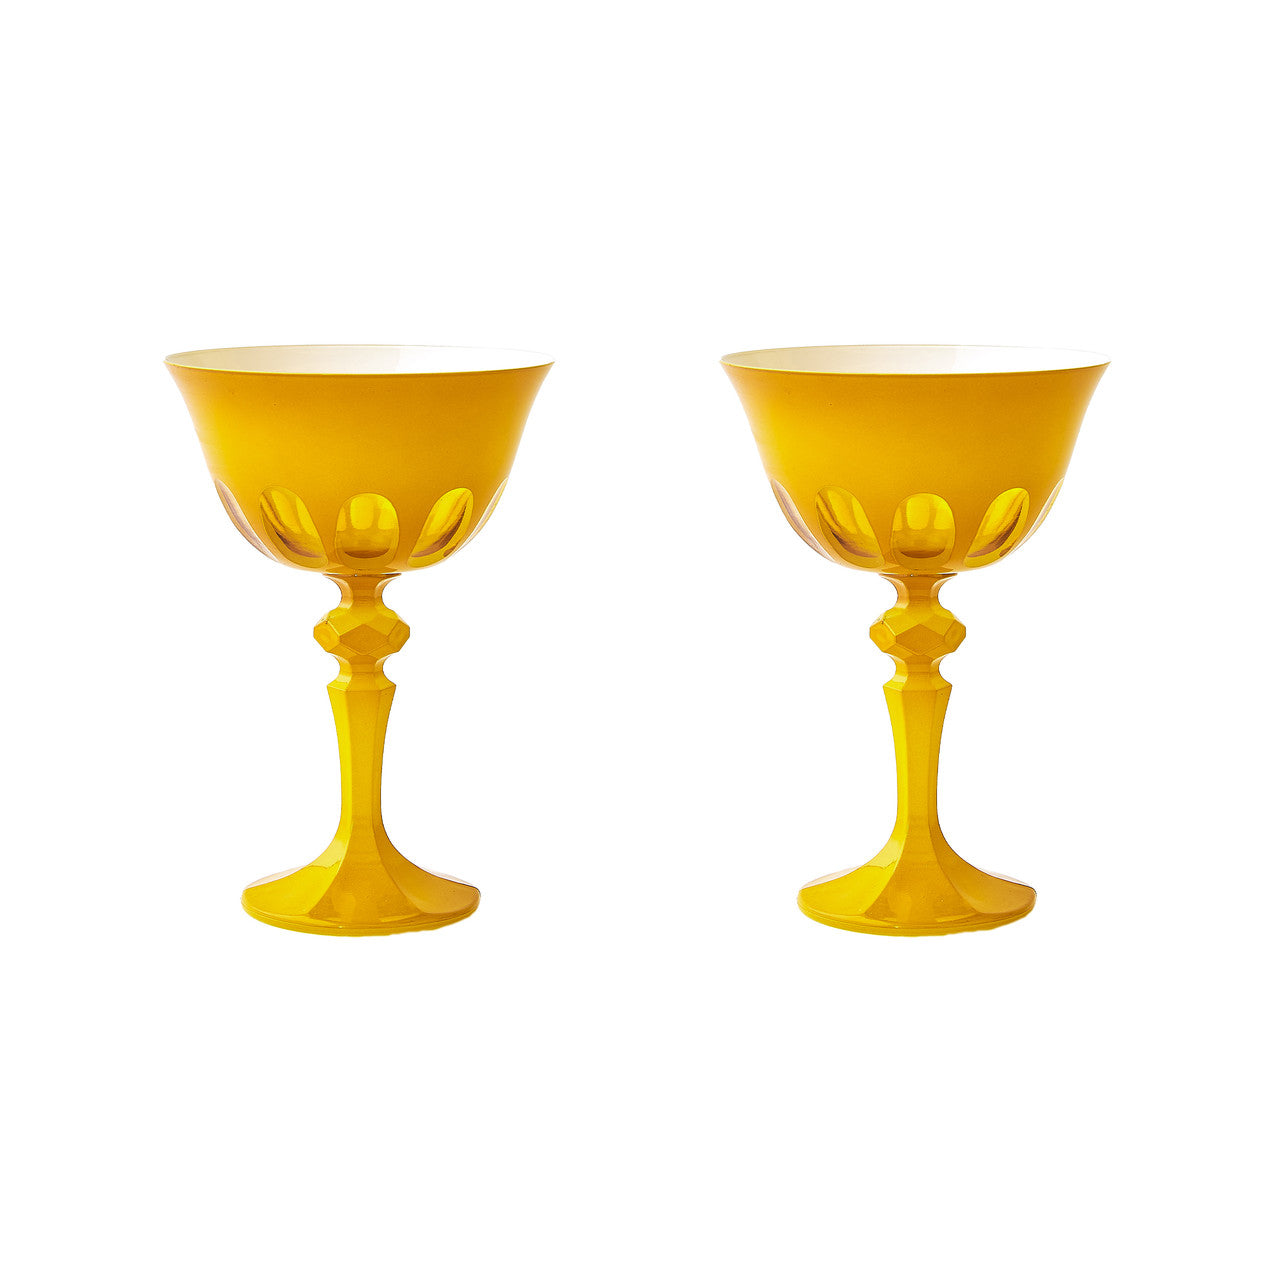 A set of Rialto Saffron Glasses by SIR/MADAM on a white surface.